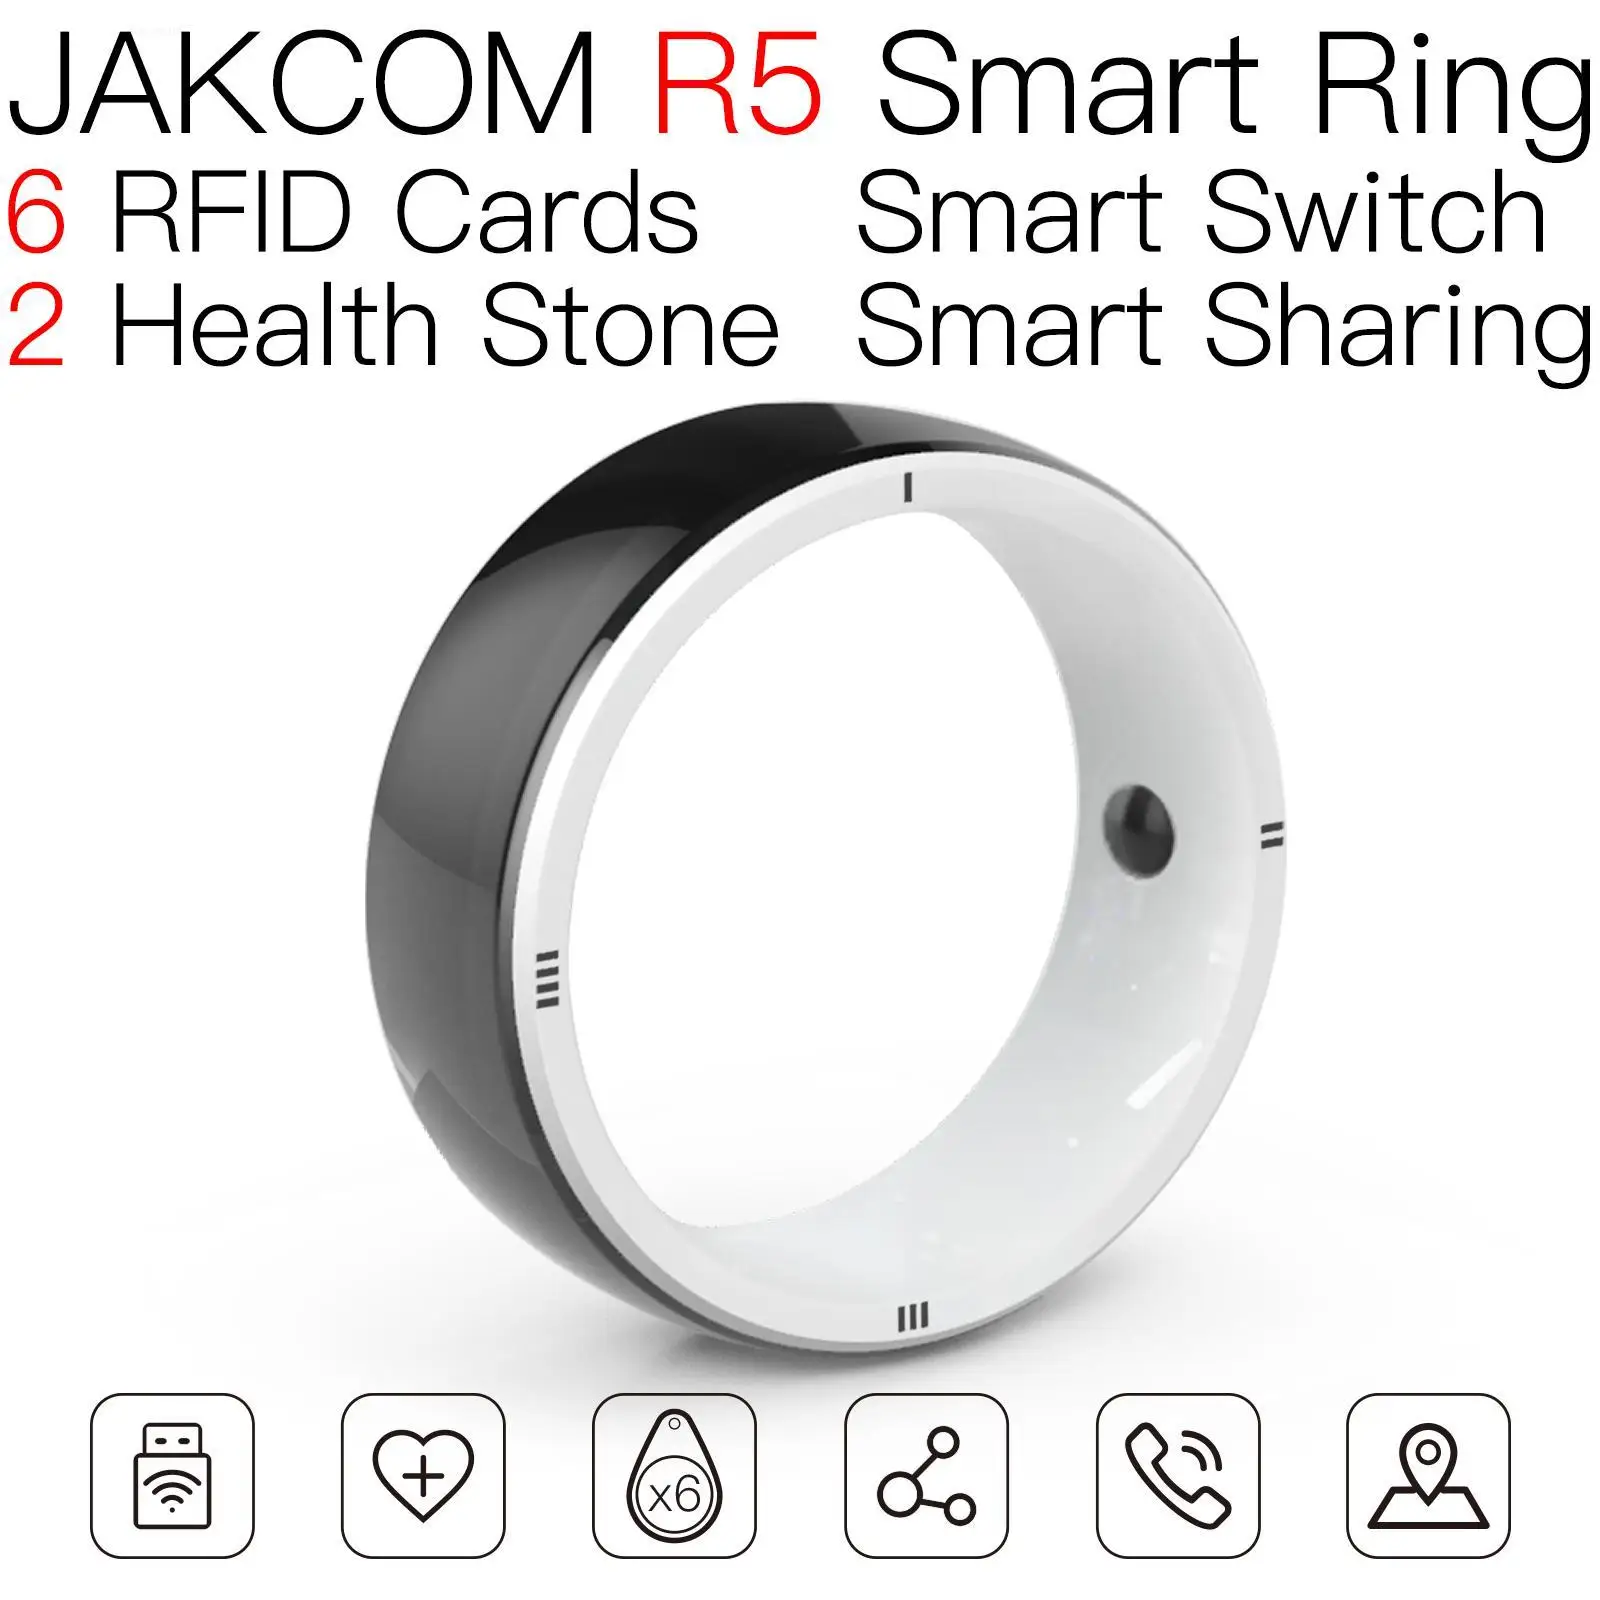 

JAKCOM R5 Smart Ring better than nfc rewritable tags anti metal tag t 5577 chip for mobile rfid led sticker 9 waterproof